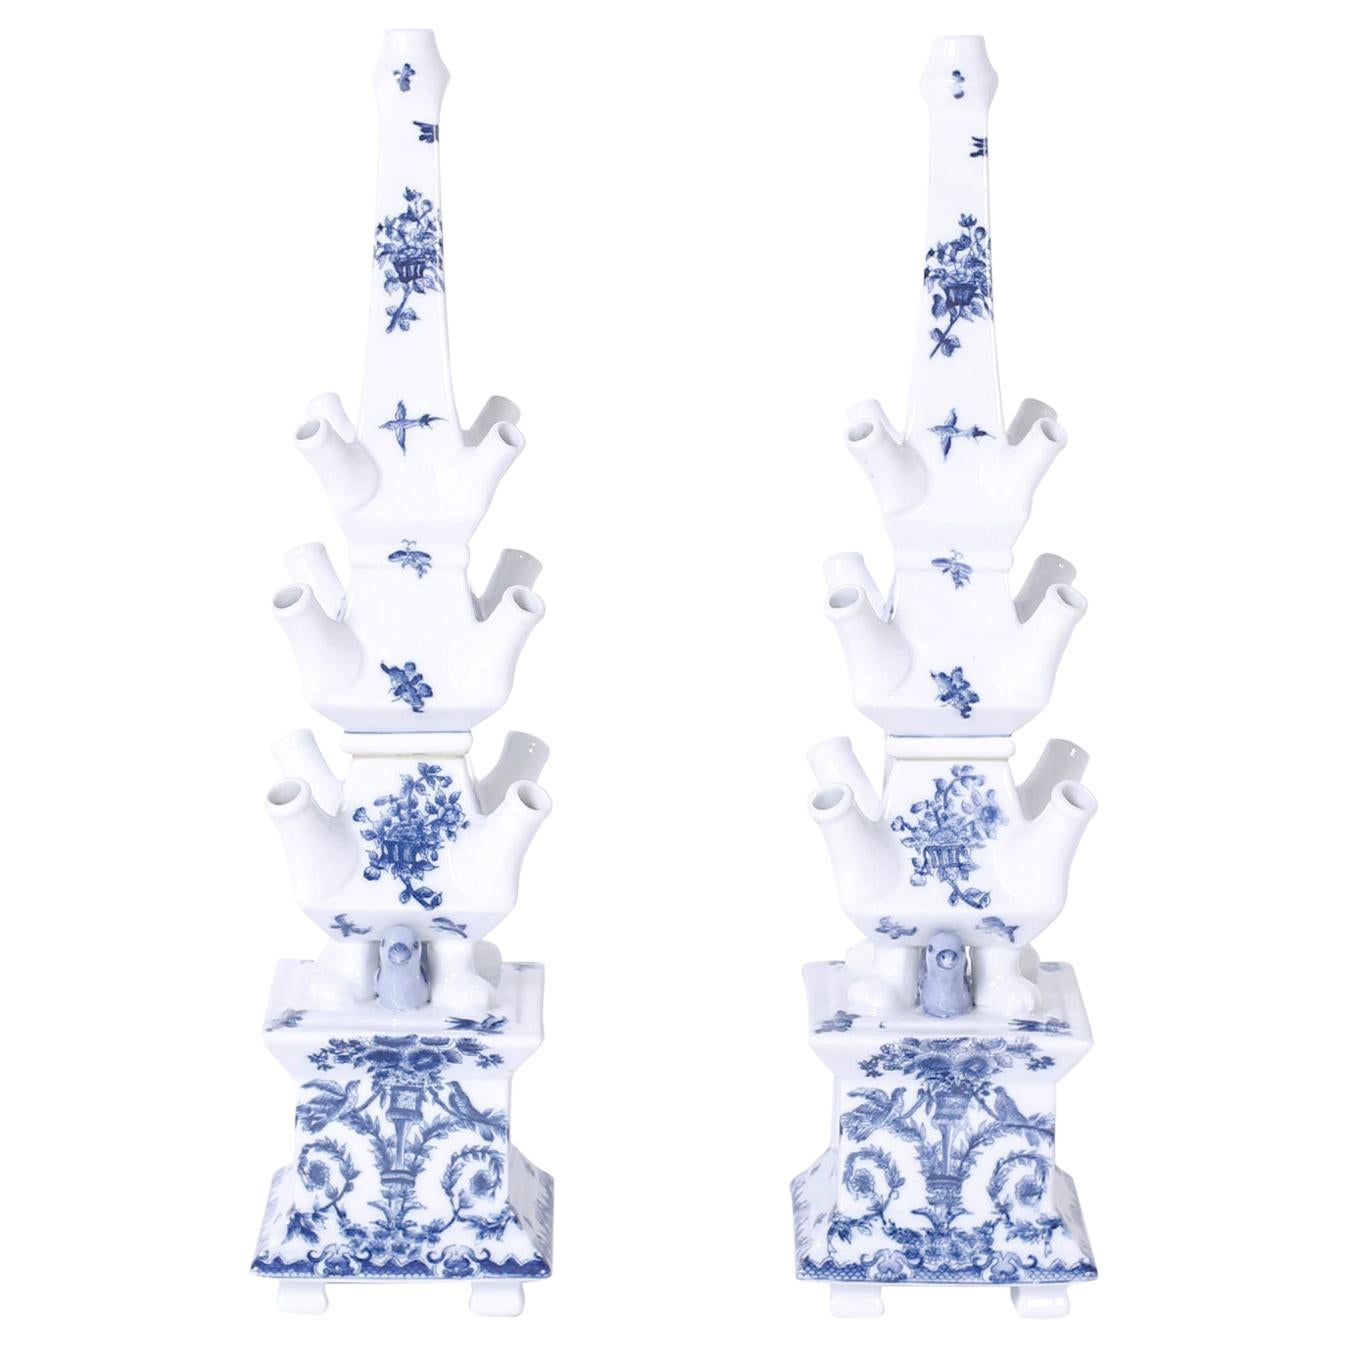 Pair of Blue and White Porcelain Pagoda Form Tulipieres